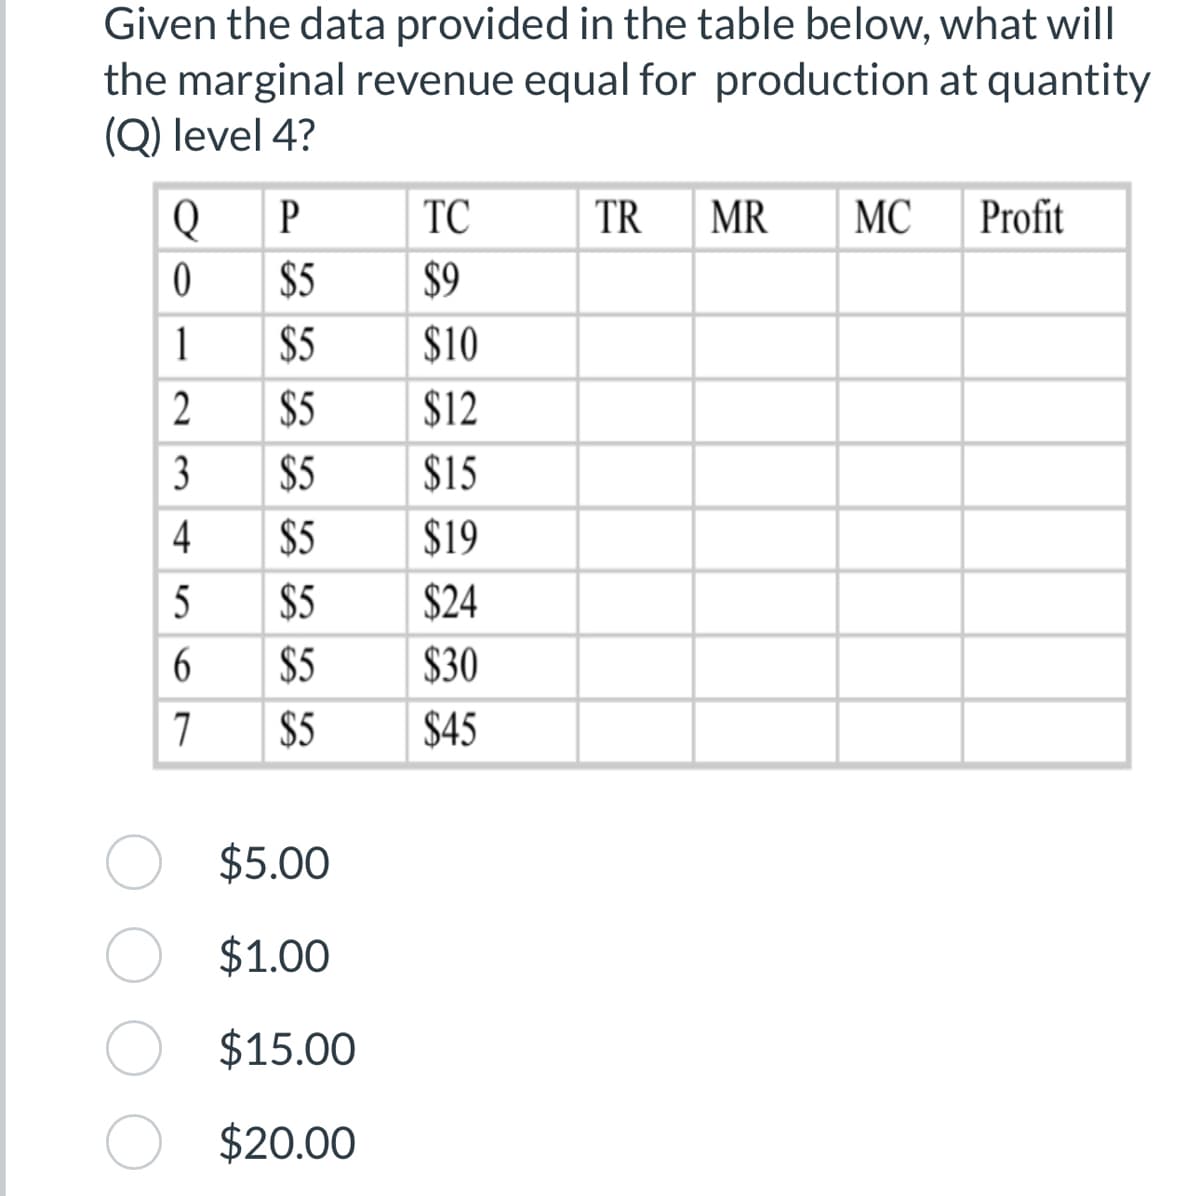 Given the data provided in the table below, what will
the marginal revenue equal for production at quantity
(Q) level 4?
Q
0
1
2
3
4
5
6
7
P
$5
$5
$5
$5
$5
$5
$5
$5
$5.00
$1.00
$15.00
$20.00
TC
$9
$10
$12
$15
$19
$24
$30
$45
TR MR MC Profit